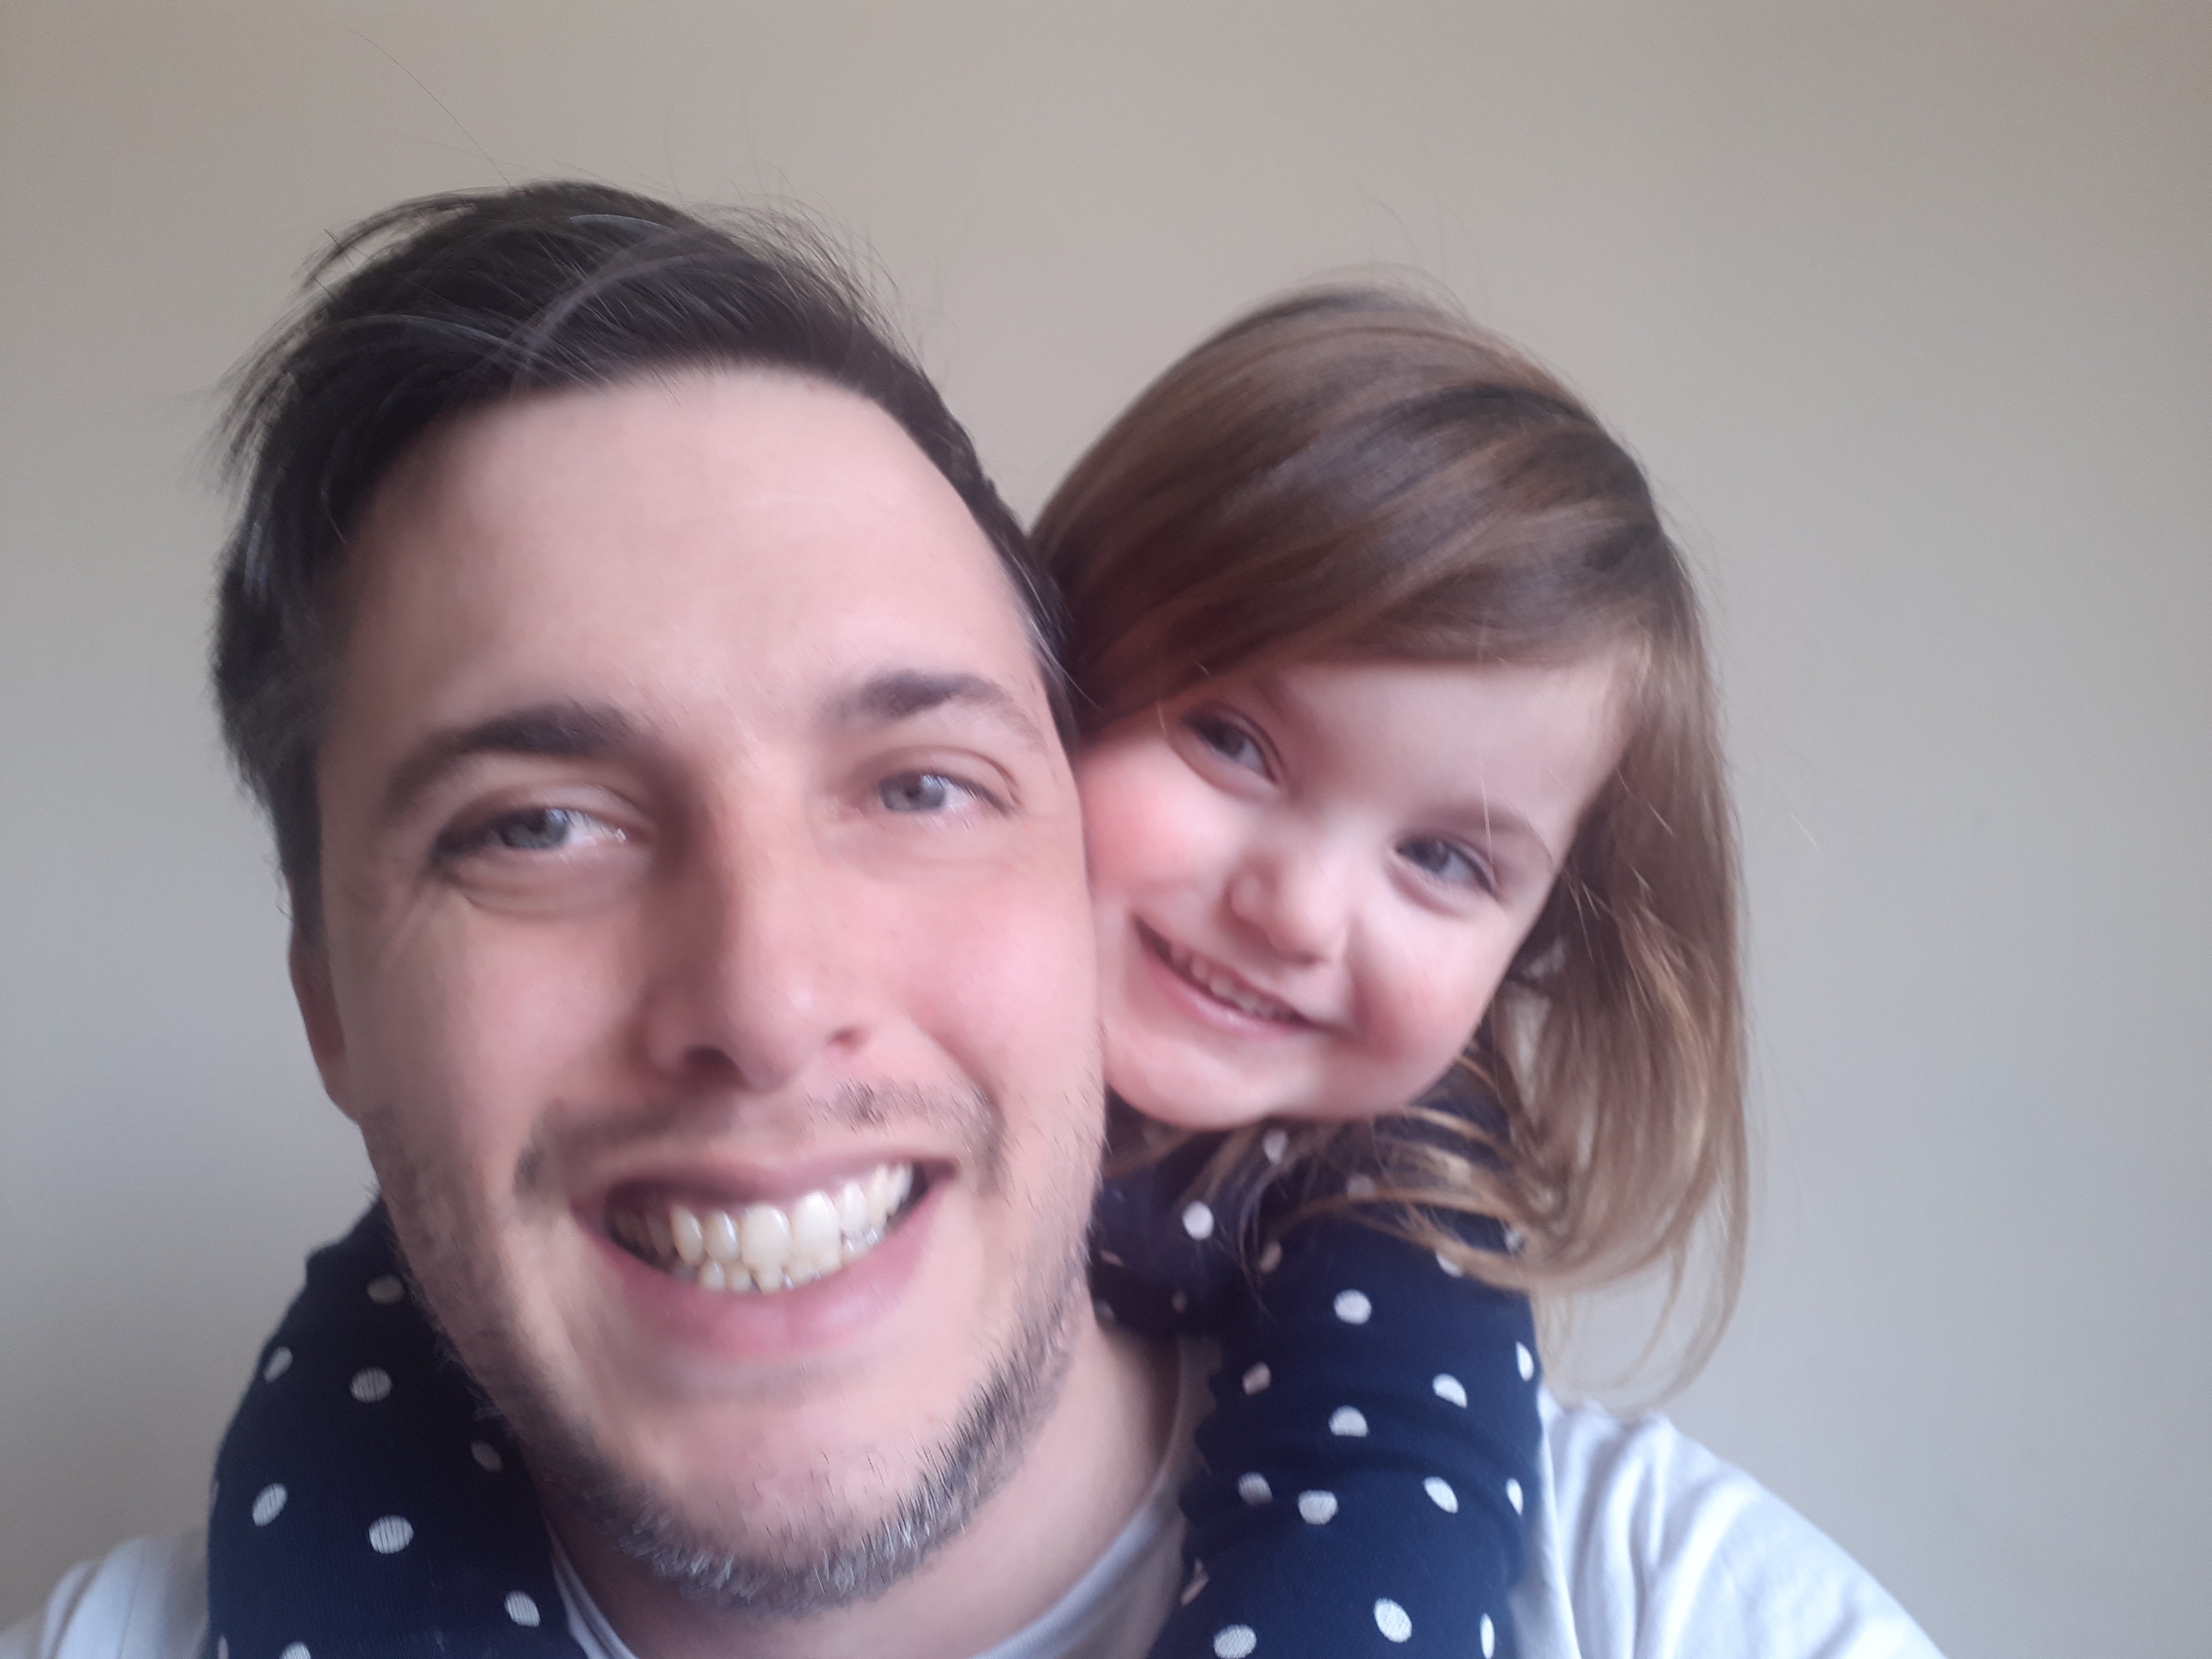 Anthony Lyman, pictured with his four-year-old daughter, says he is already struggling financially